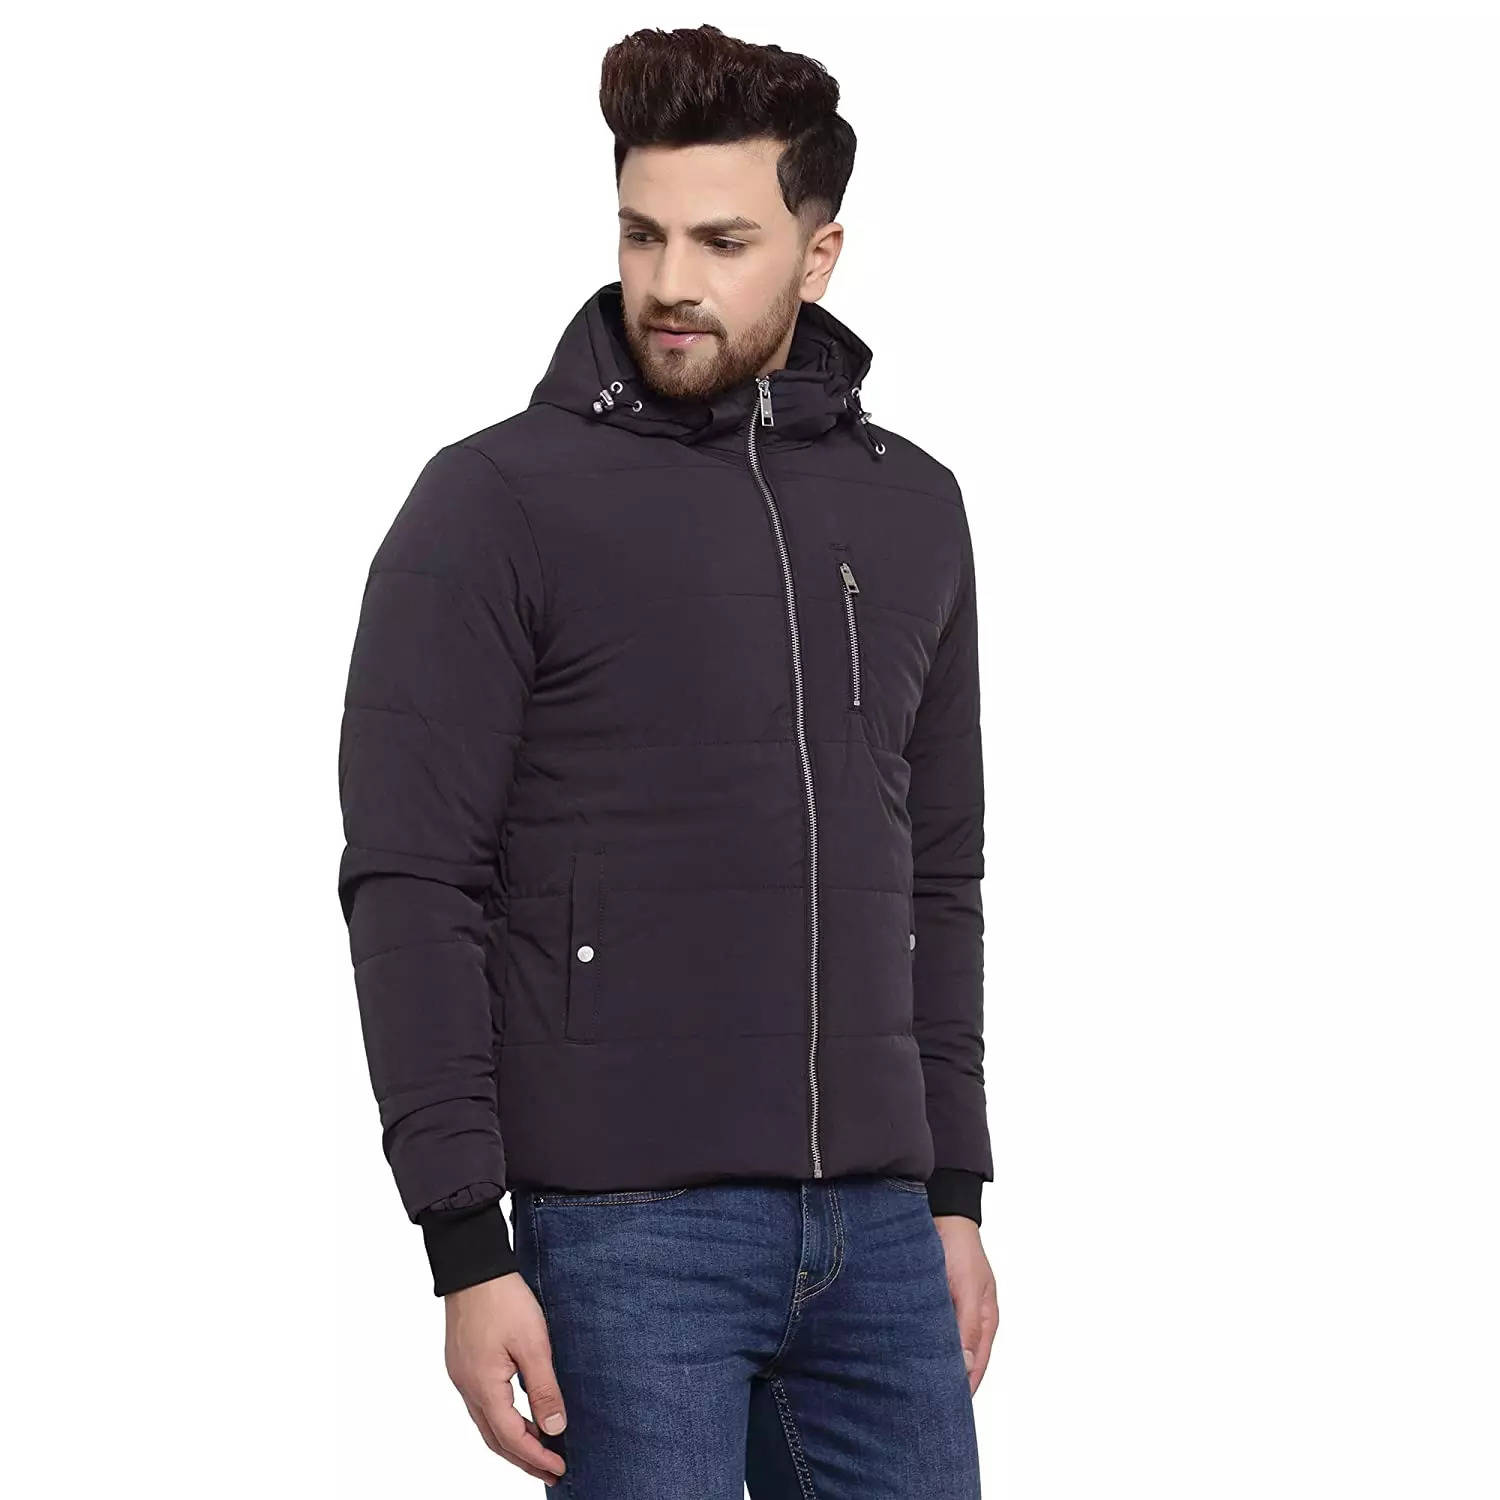 Jackets for men: Stylish Jackets for Men - The Economic Times